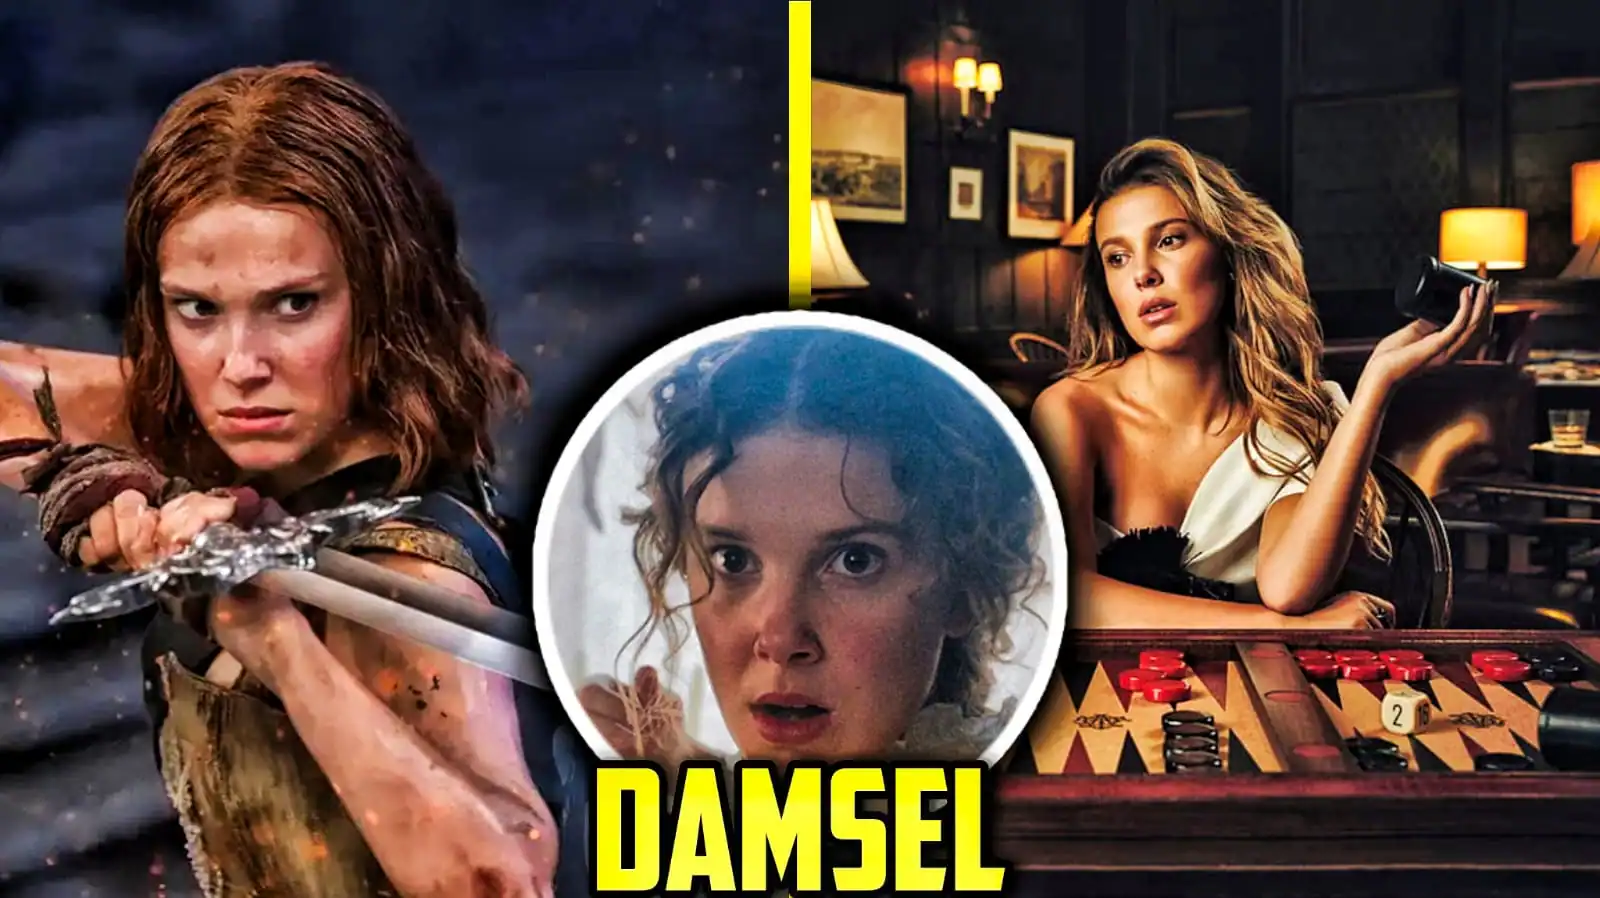 Trailer For ‘DAMSEL’, Starring Millie Bobby Brown, Drops This Saturday